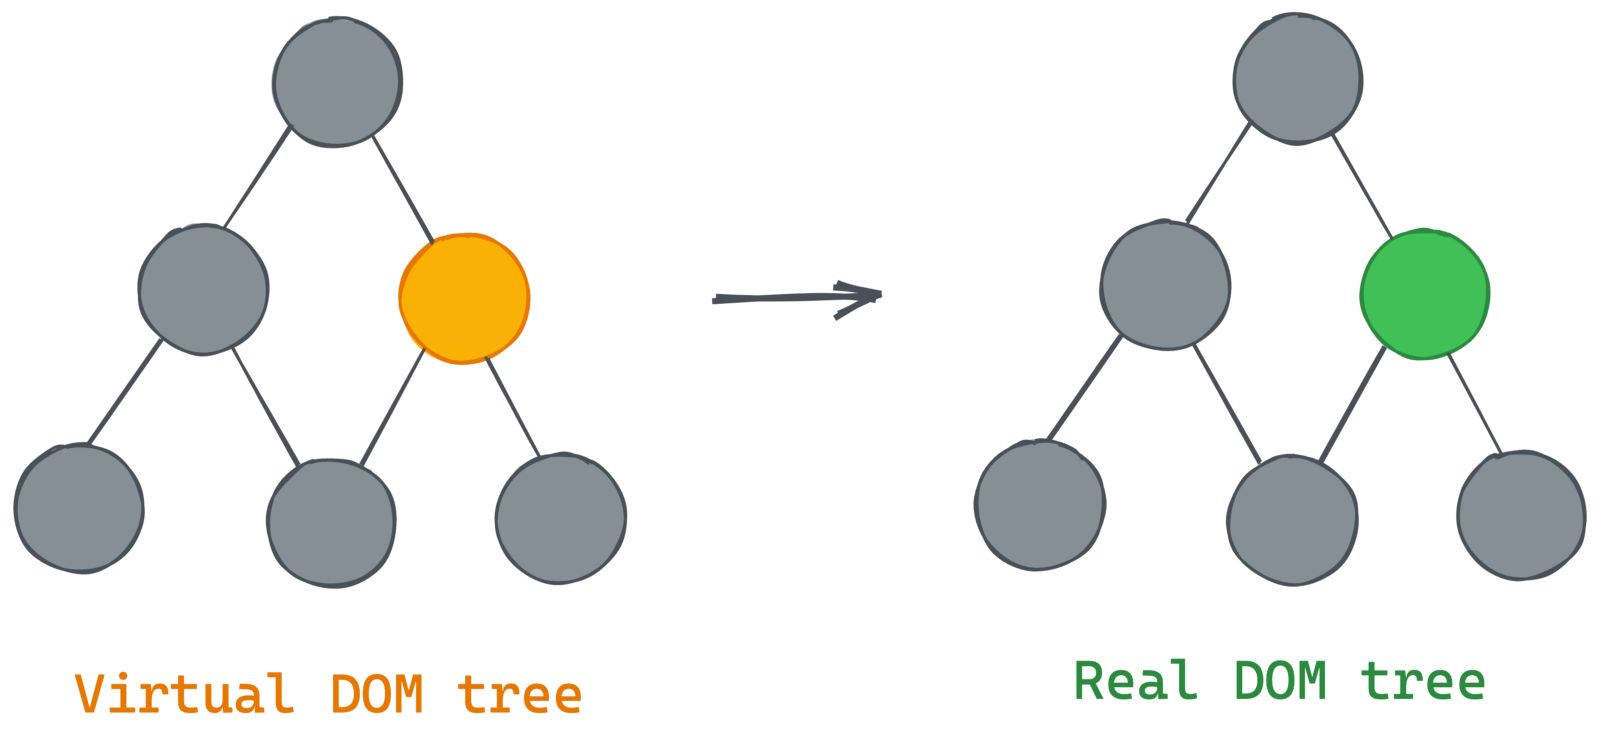 Virtual DOM tree mimics the same tree structure as the real DOM tree, even highlighting the same node.